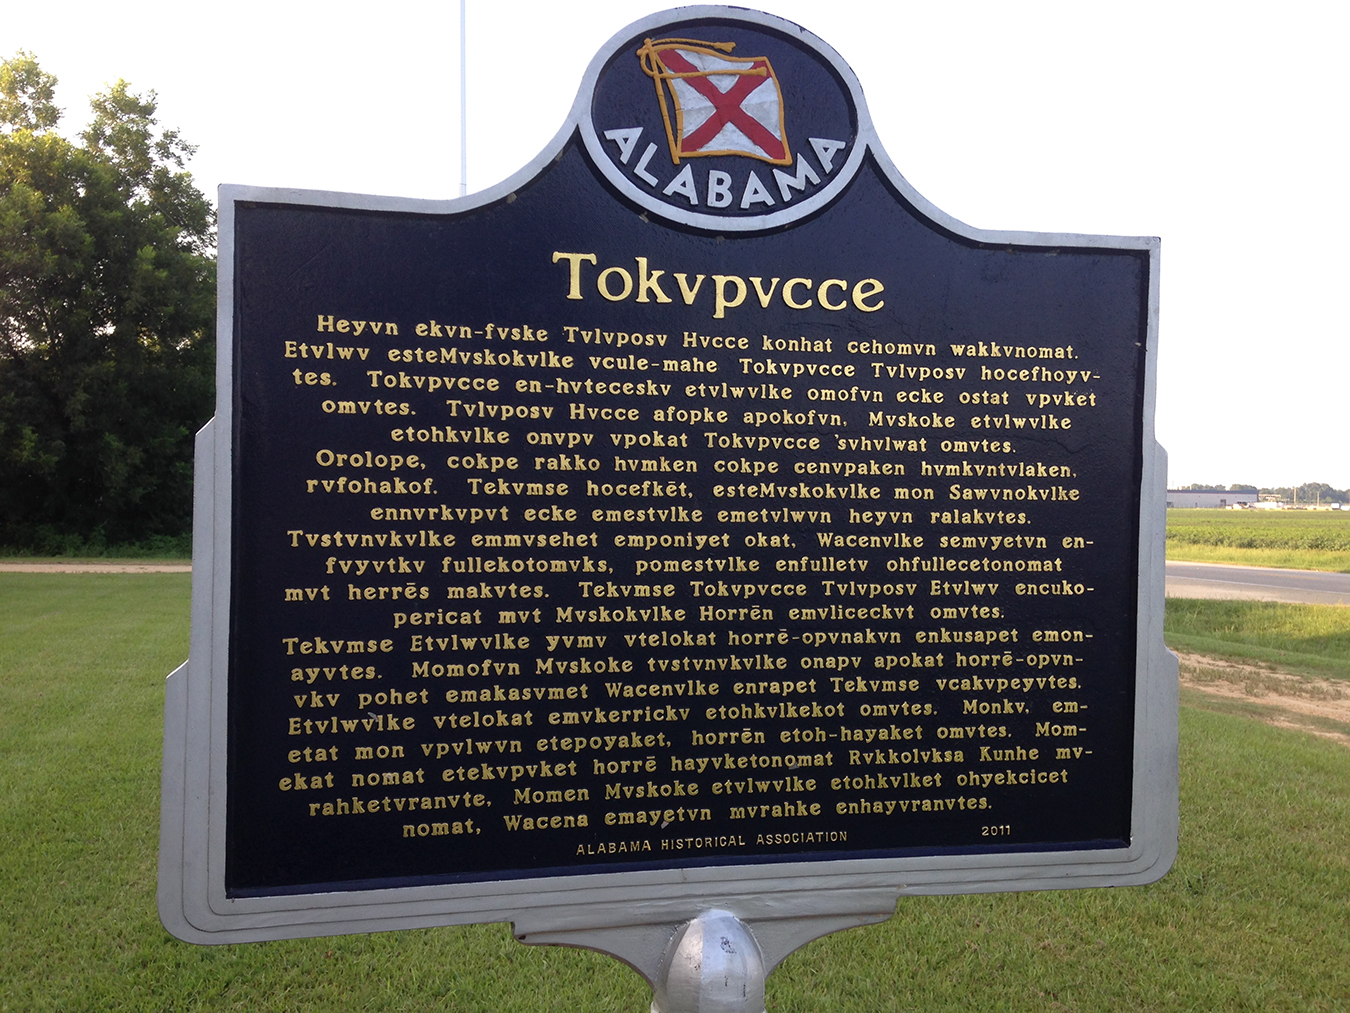 The Mvskoke side of the historical marker at Tukabatchee. Photo by Leigh Bloch.